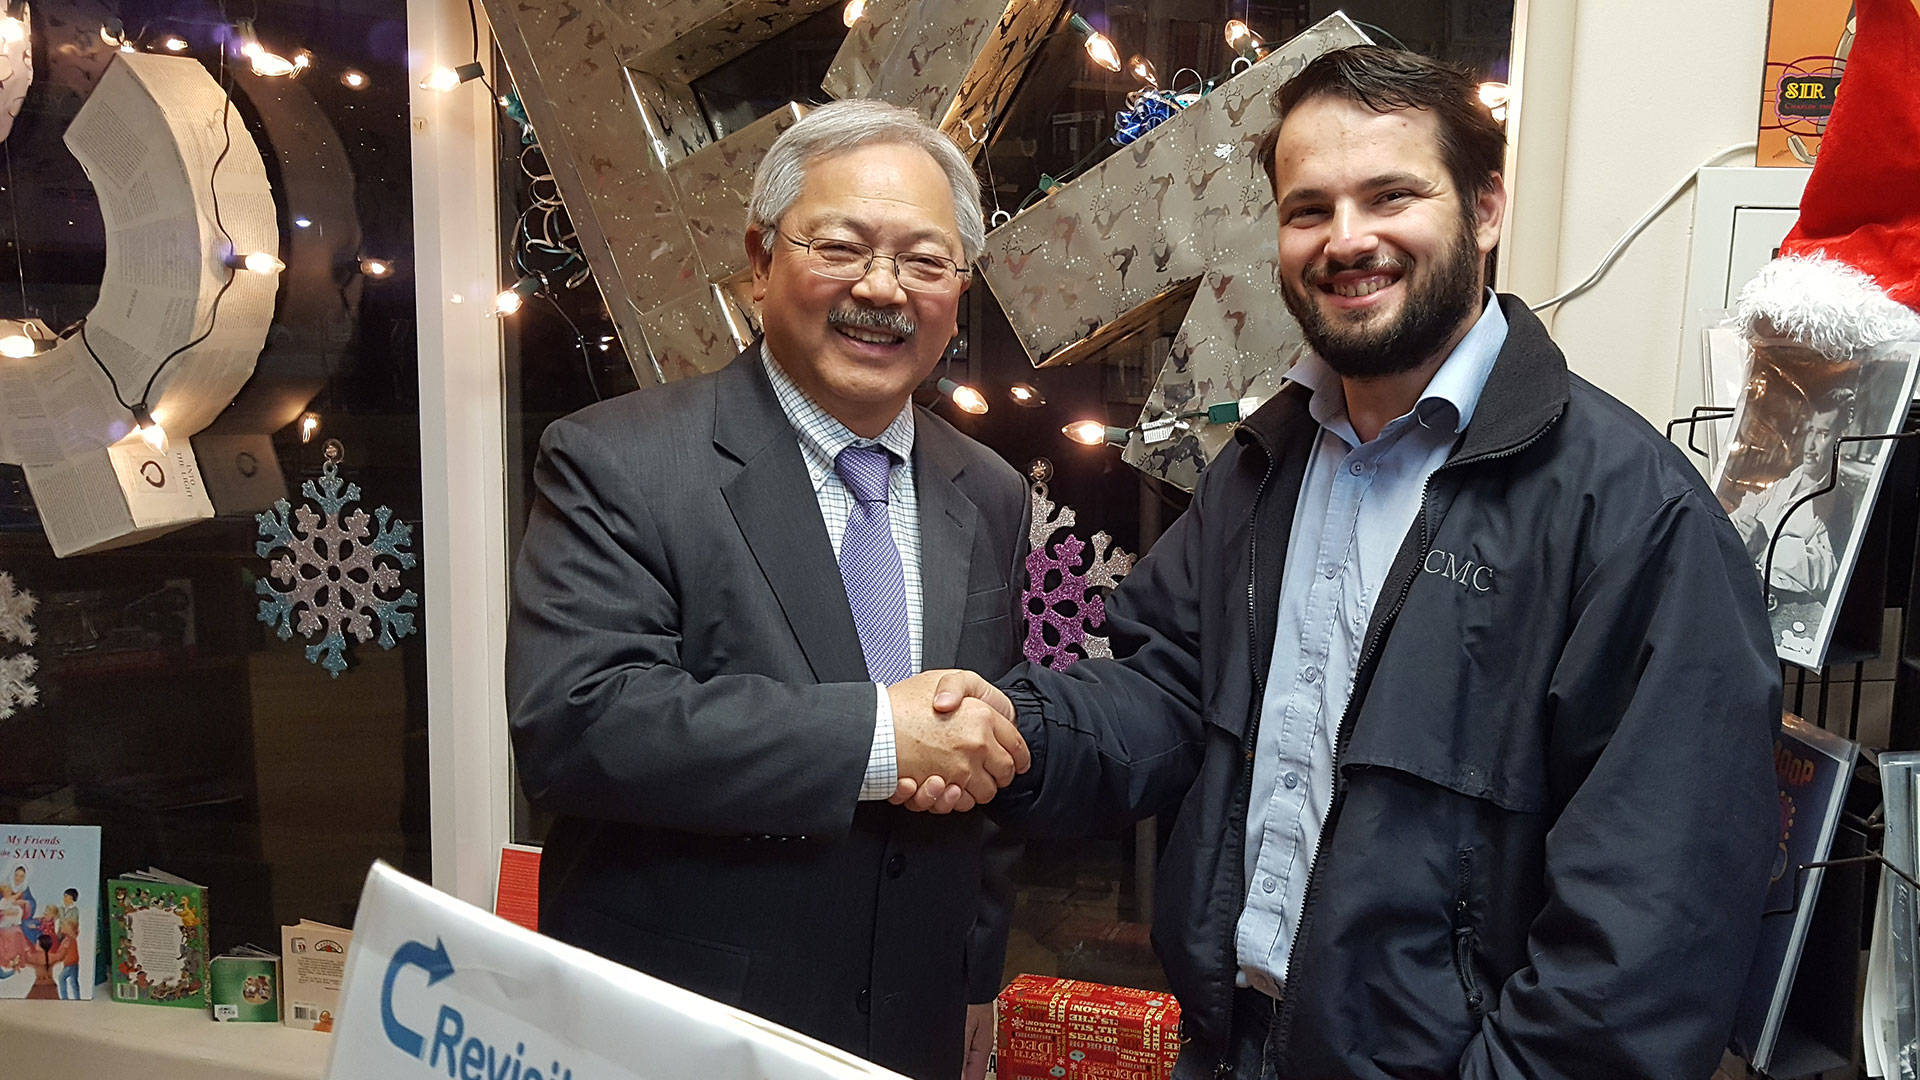 Mayor Ed Lee poses with Stevens Books owner Joseph Volansky while visiting an art installation at the bookstore on Dec. 8, three days before he died. Ezra Yu